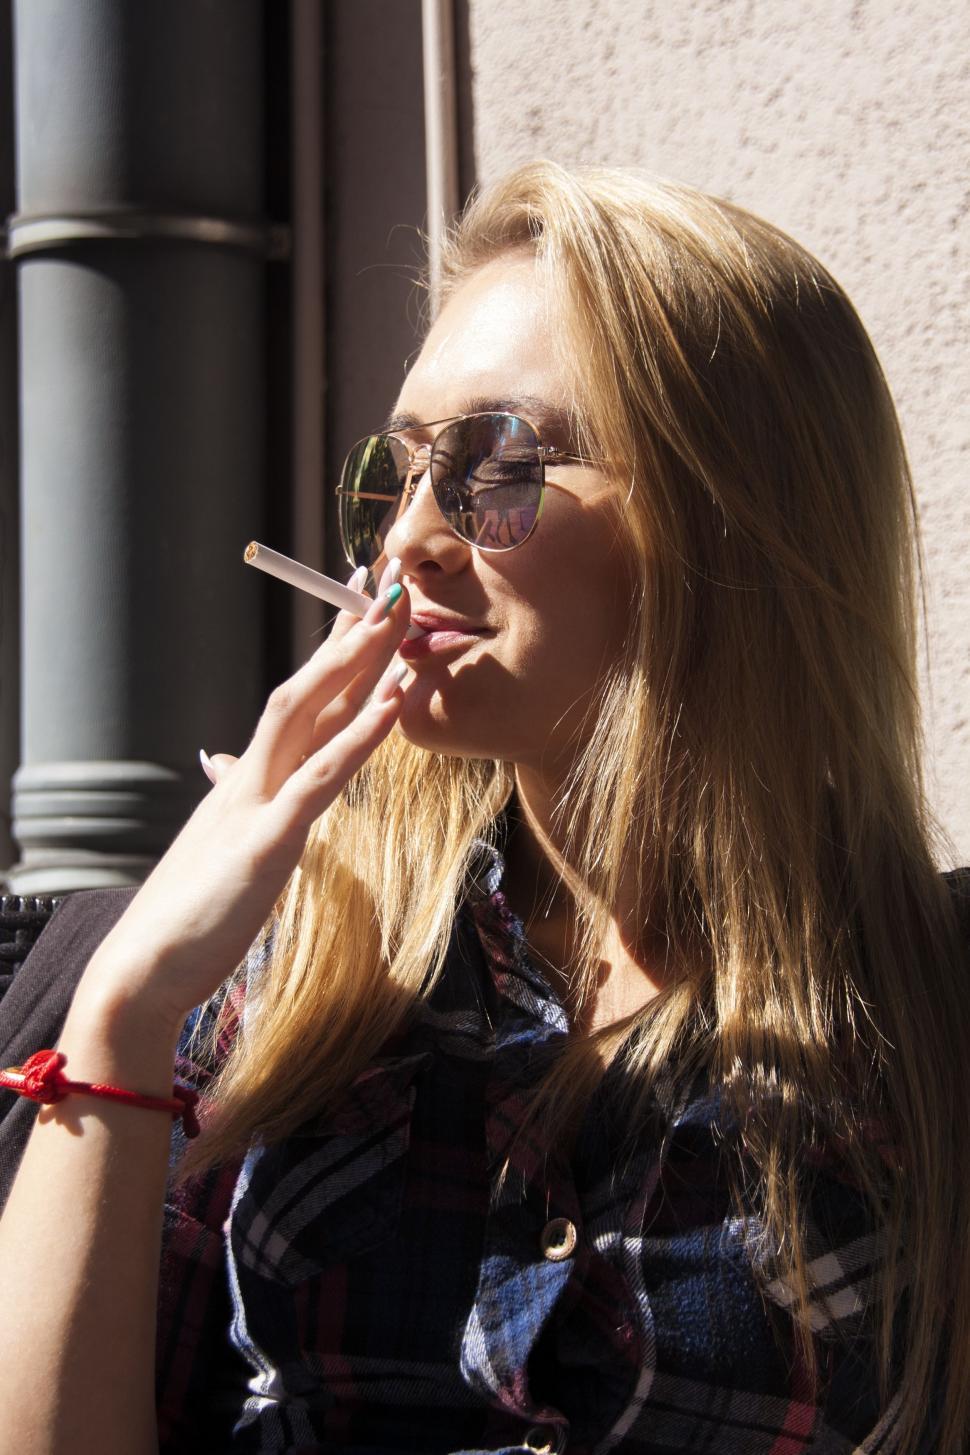 Free Image of Woman Smoking a Cigarette on City Street 